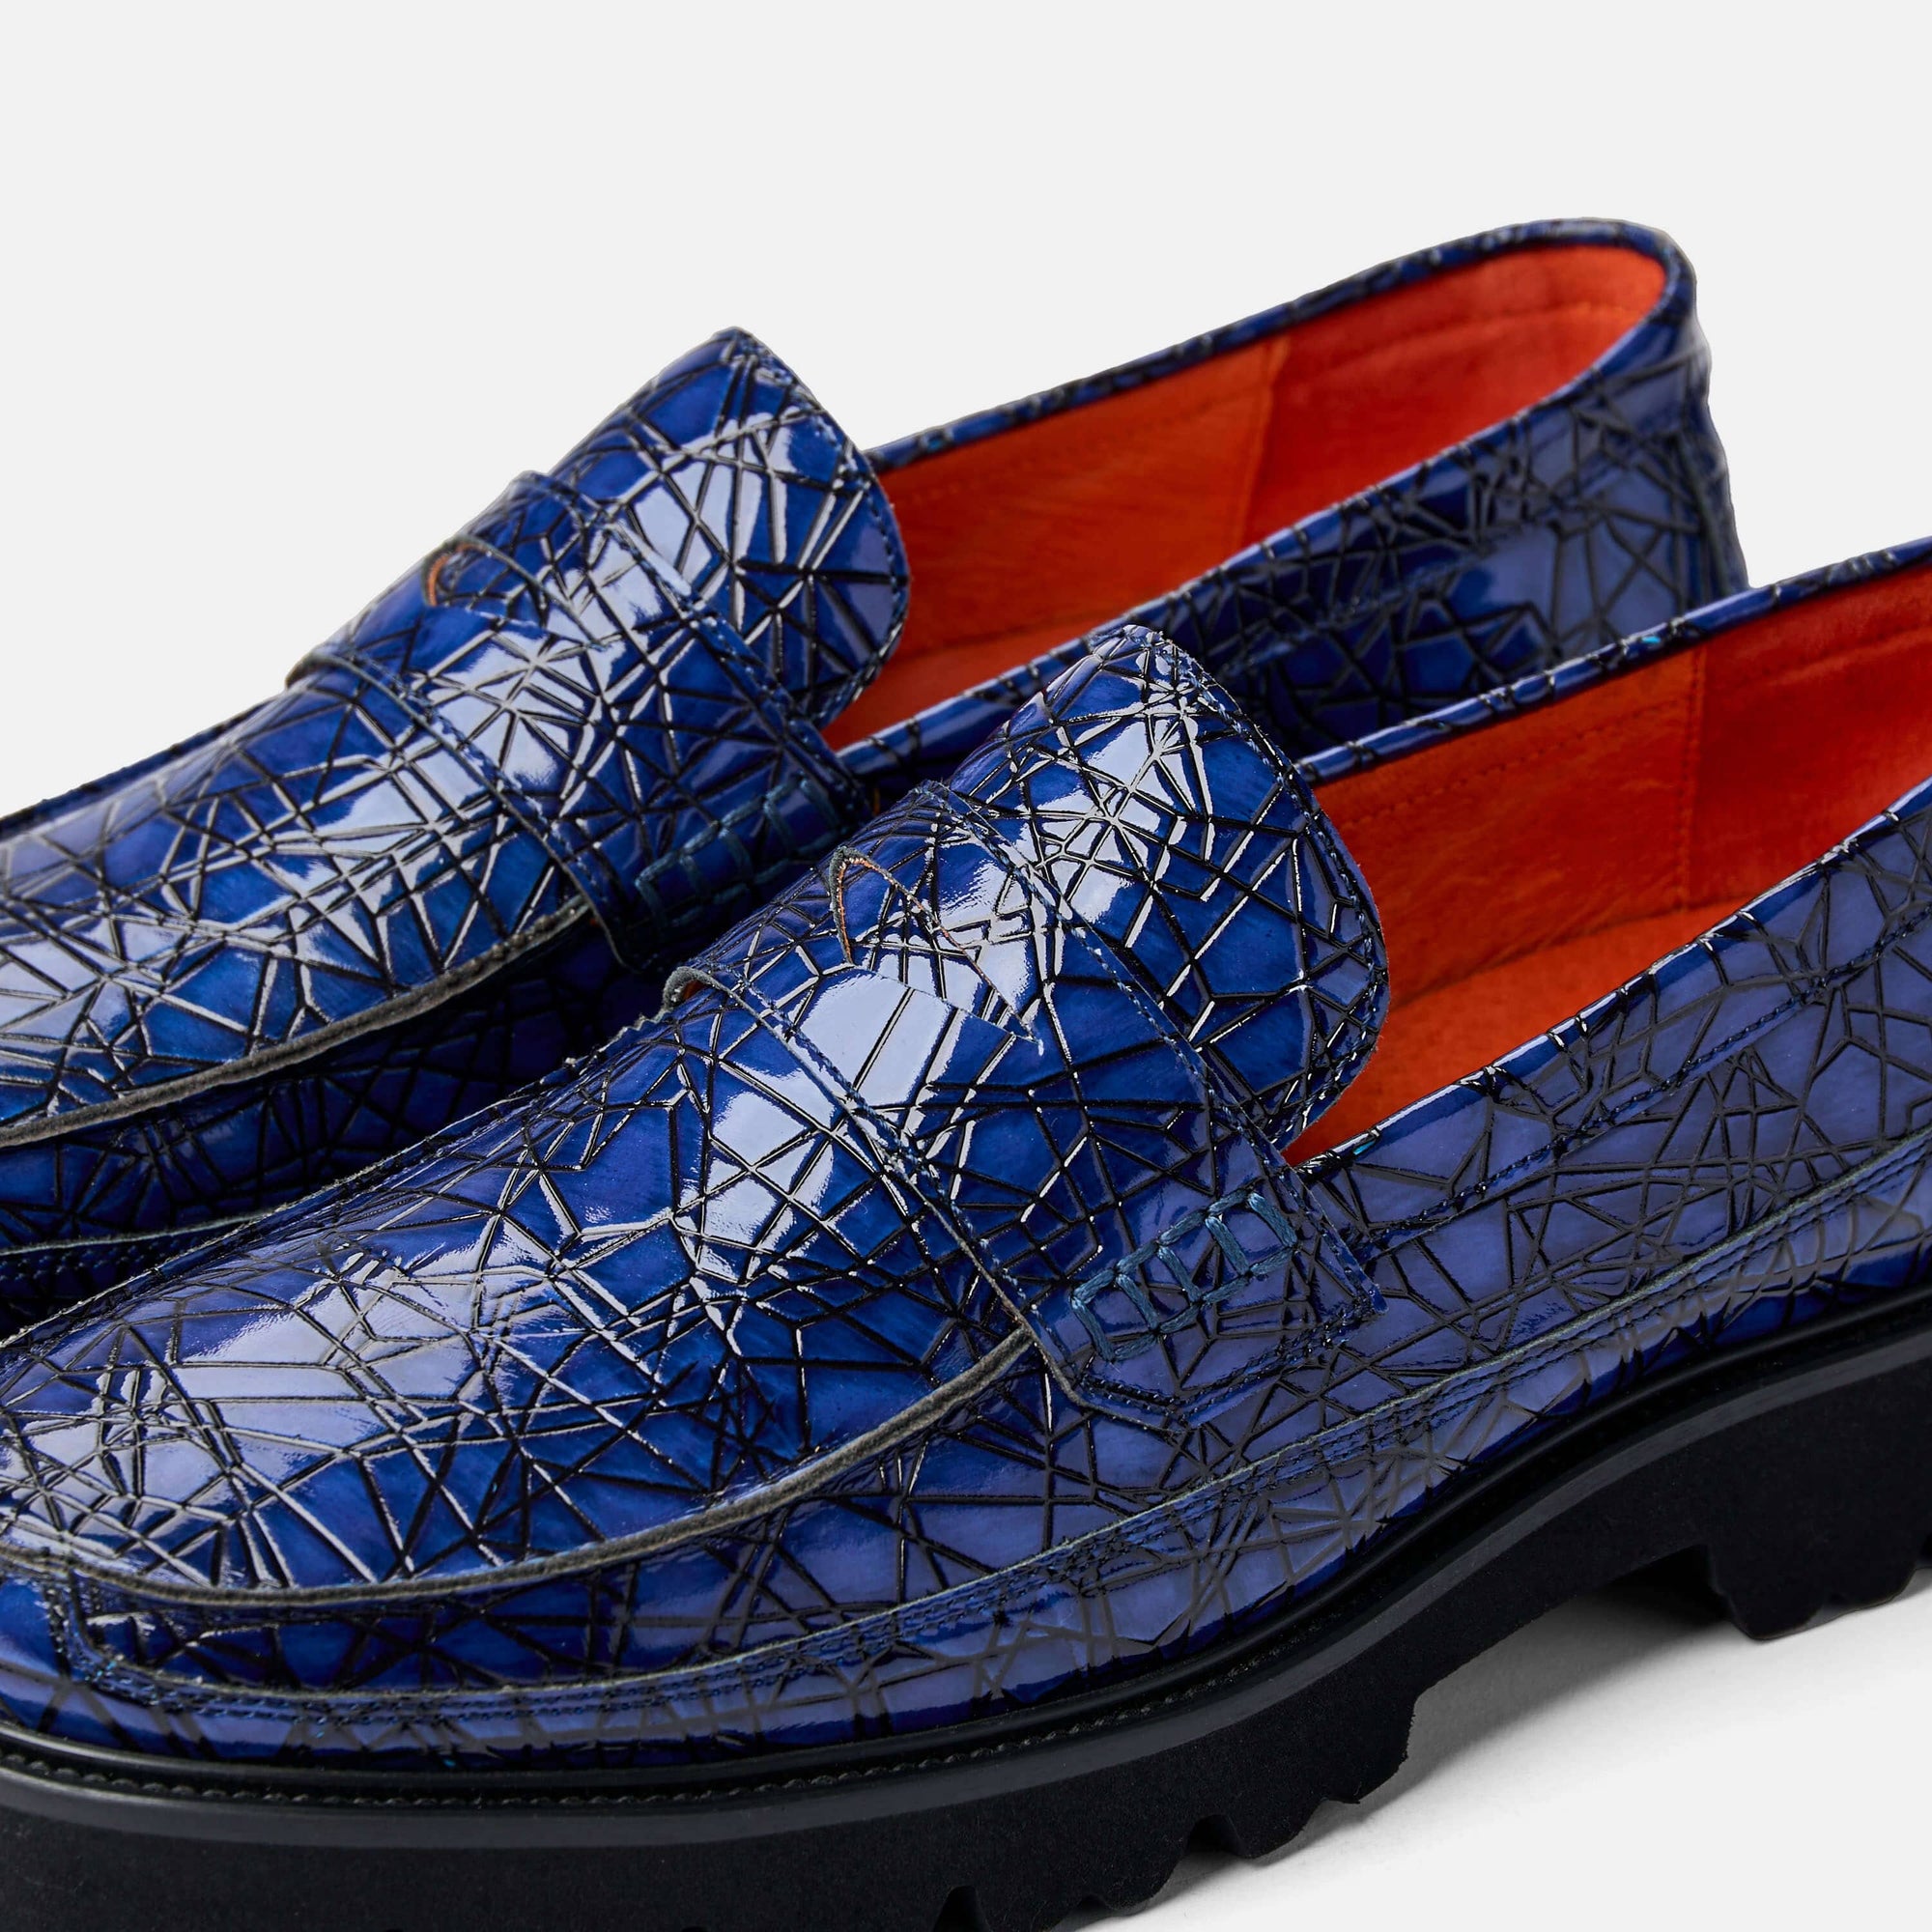 Adler Navy Croc Leather Penny Loafers